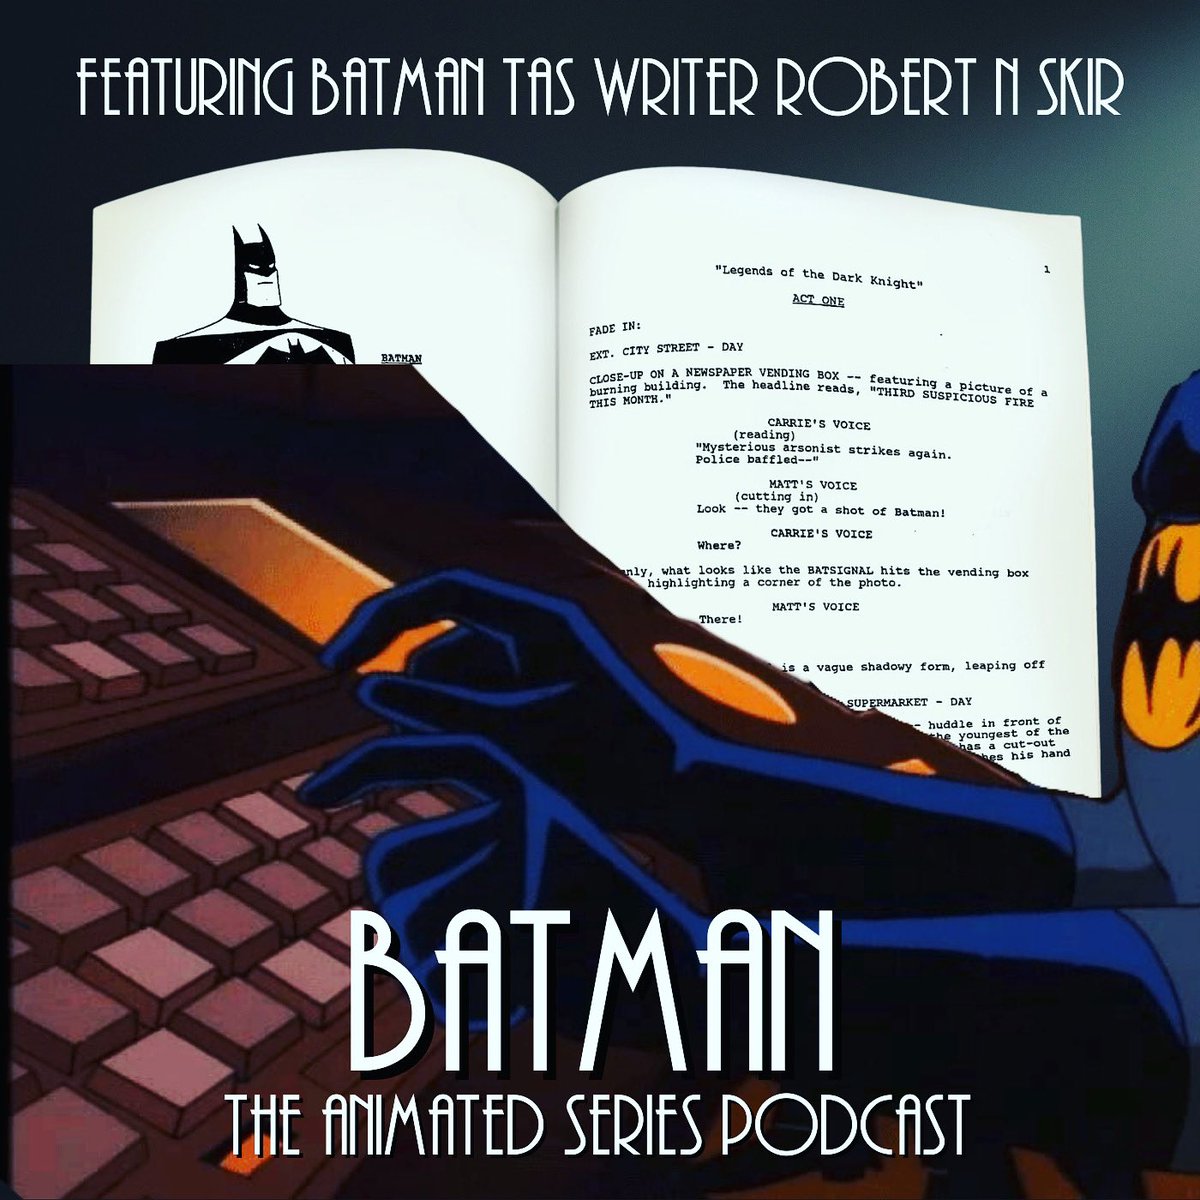 🚨NEW EPISODE OUT NOW🦇 Batman TAS writer Robert N Skit joins us to chat: His Silicon Soul, What is Reality? and Lock-Up! Head to wherever you get your podcasts to listen or click here: open.spotify.com/episode/6YFOXz… #batman #batmantas #batmantheanimatedseries #writer #podcast #90s